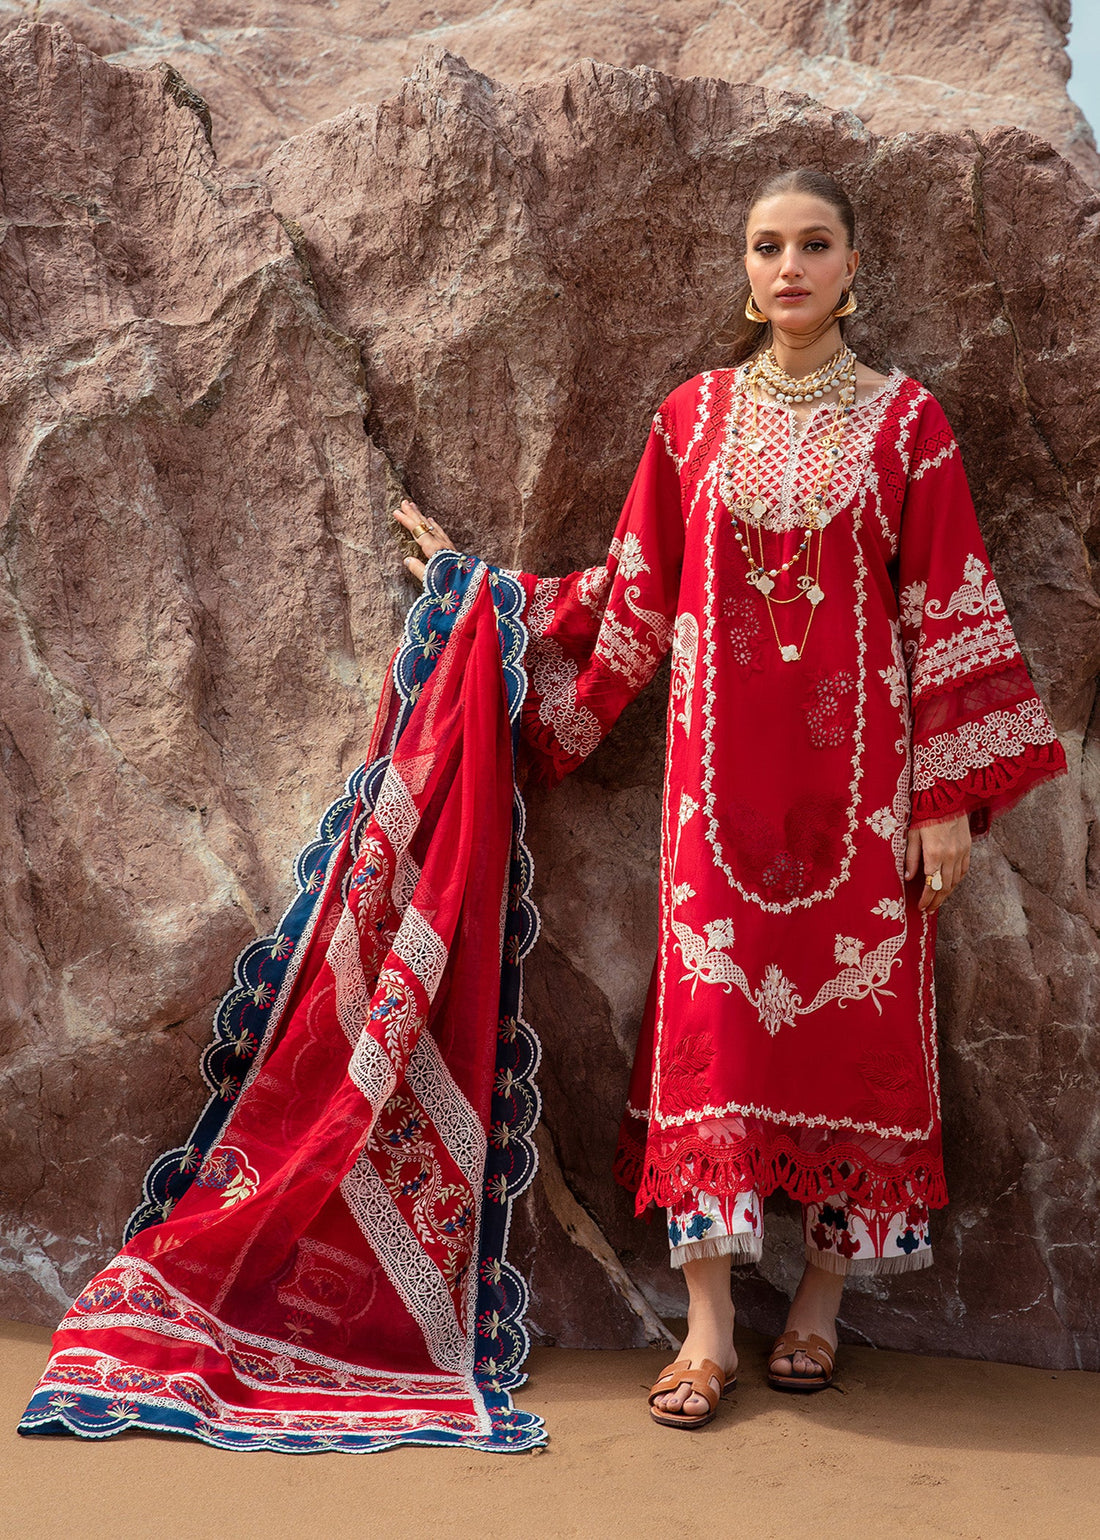 Crimson | Lawn 24 | Stars of Fire - Flame red - Khanumjan  Pakistani Clothes and Designer Dresses in UK, USA 